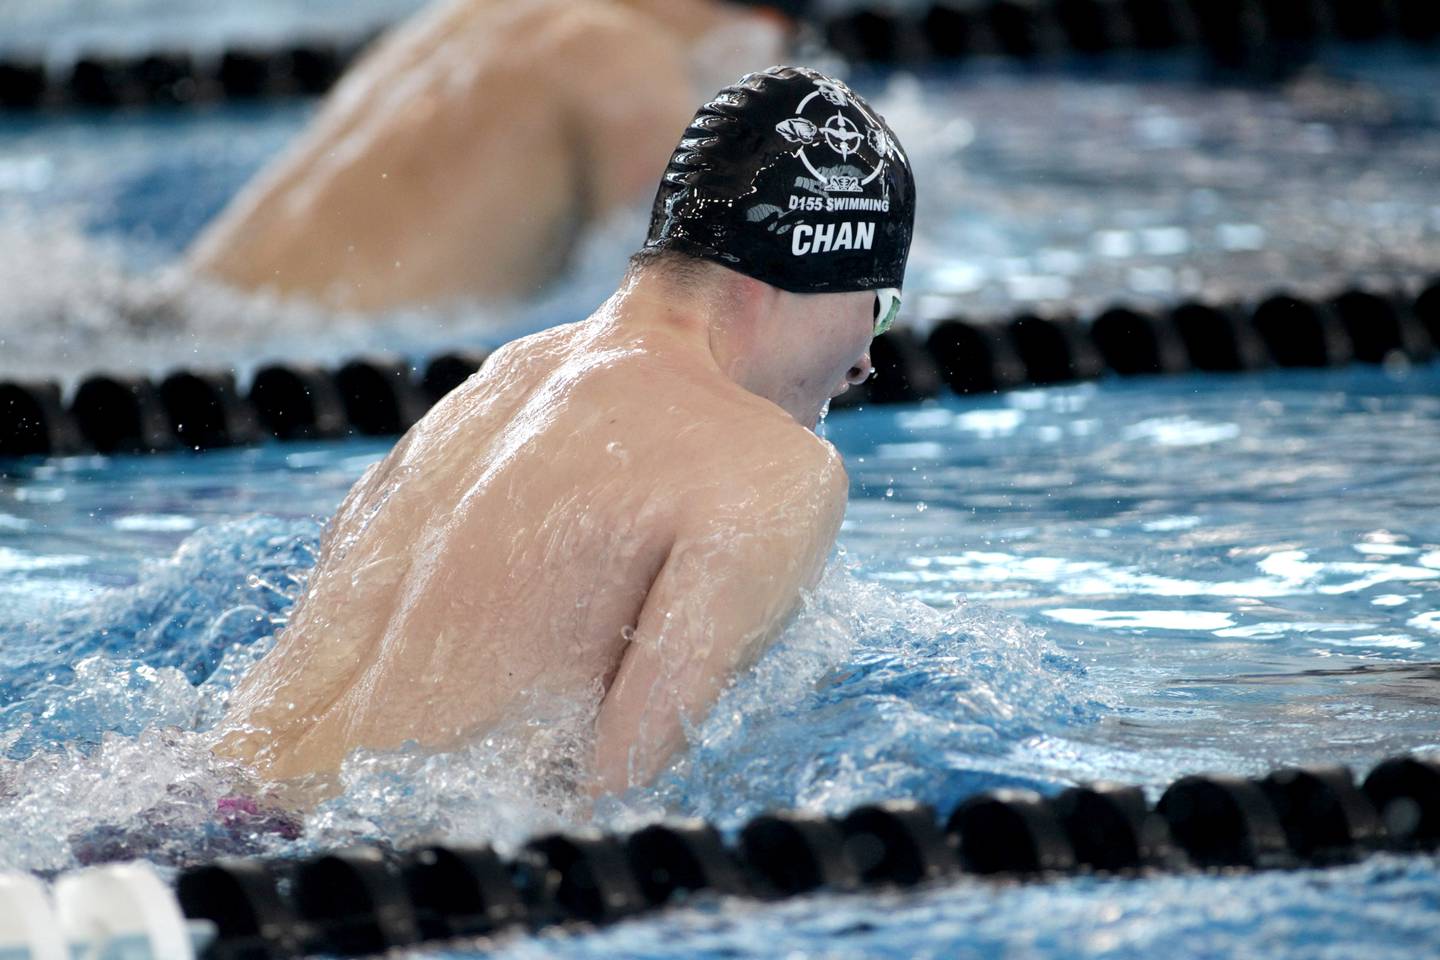 Cary-Grove co-op's Connor Chan swims the breaststroke leg of the 200-yard medley relay consolation heat during the IHSA Boys State Championships at FMC Natatorium in Westmont on Saturday, Feb. 25, 2023.